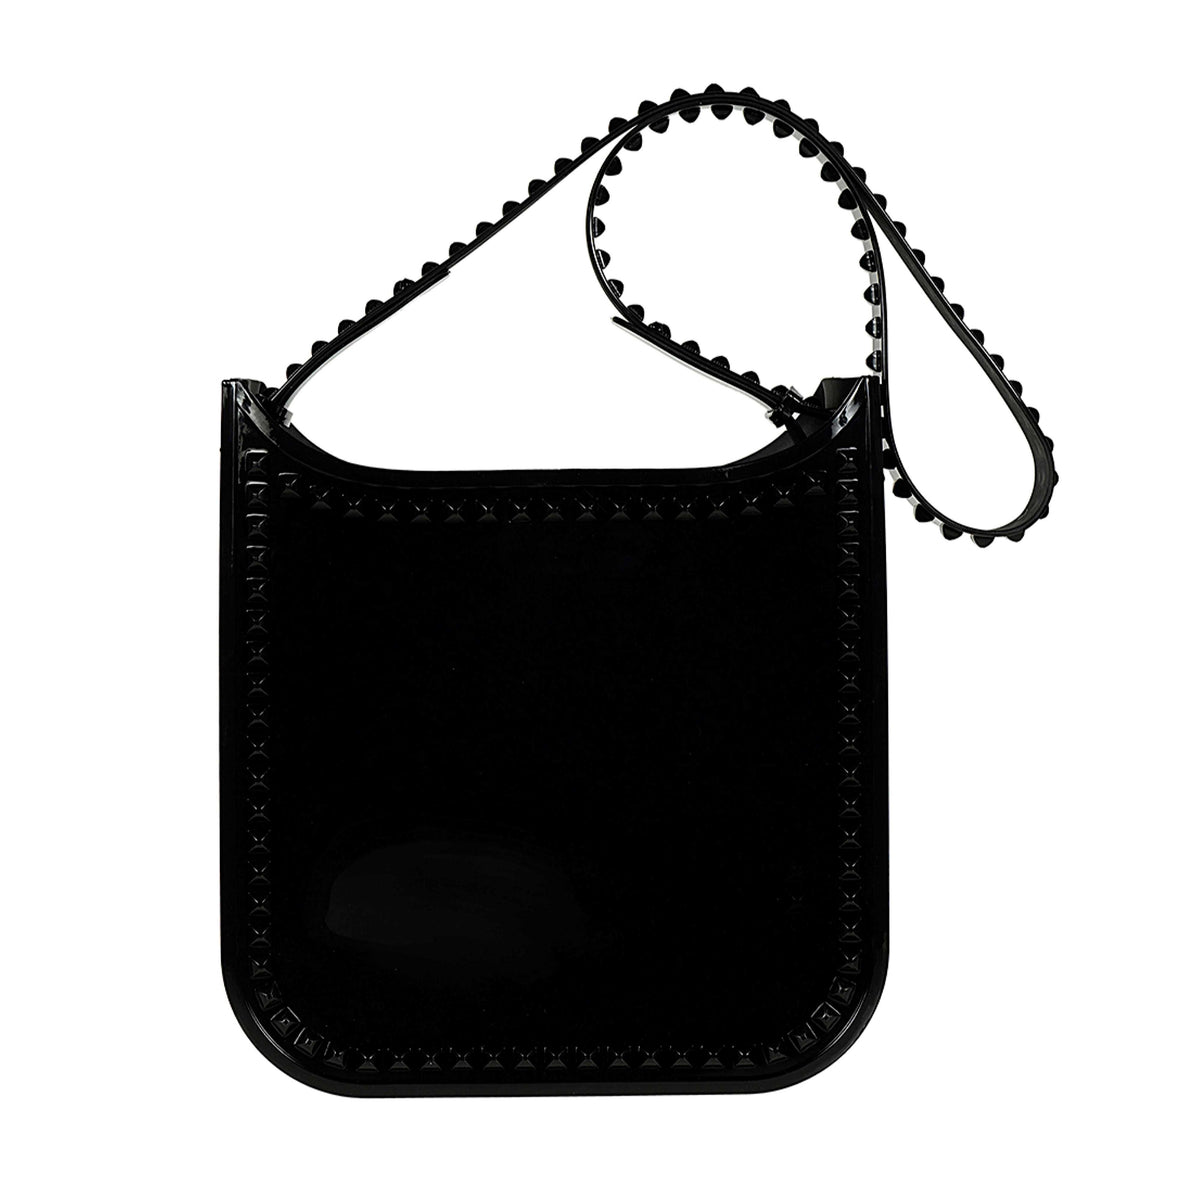 rubber tote bags in black from Carmen Sol